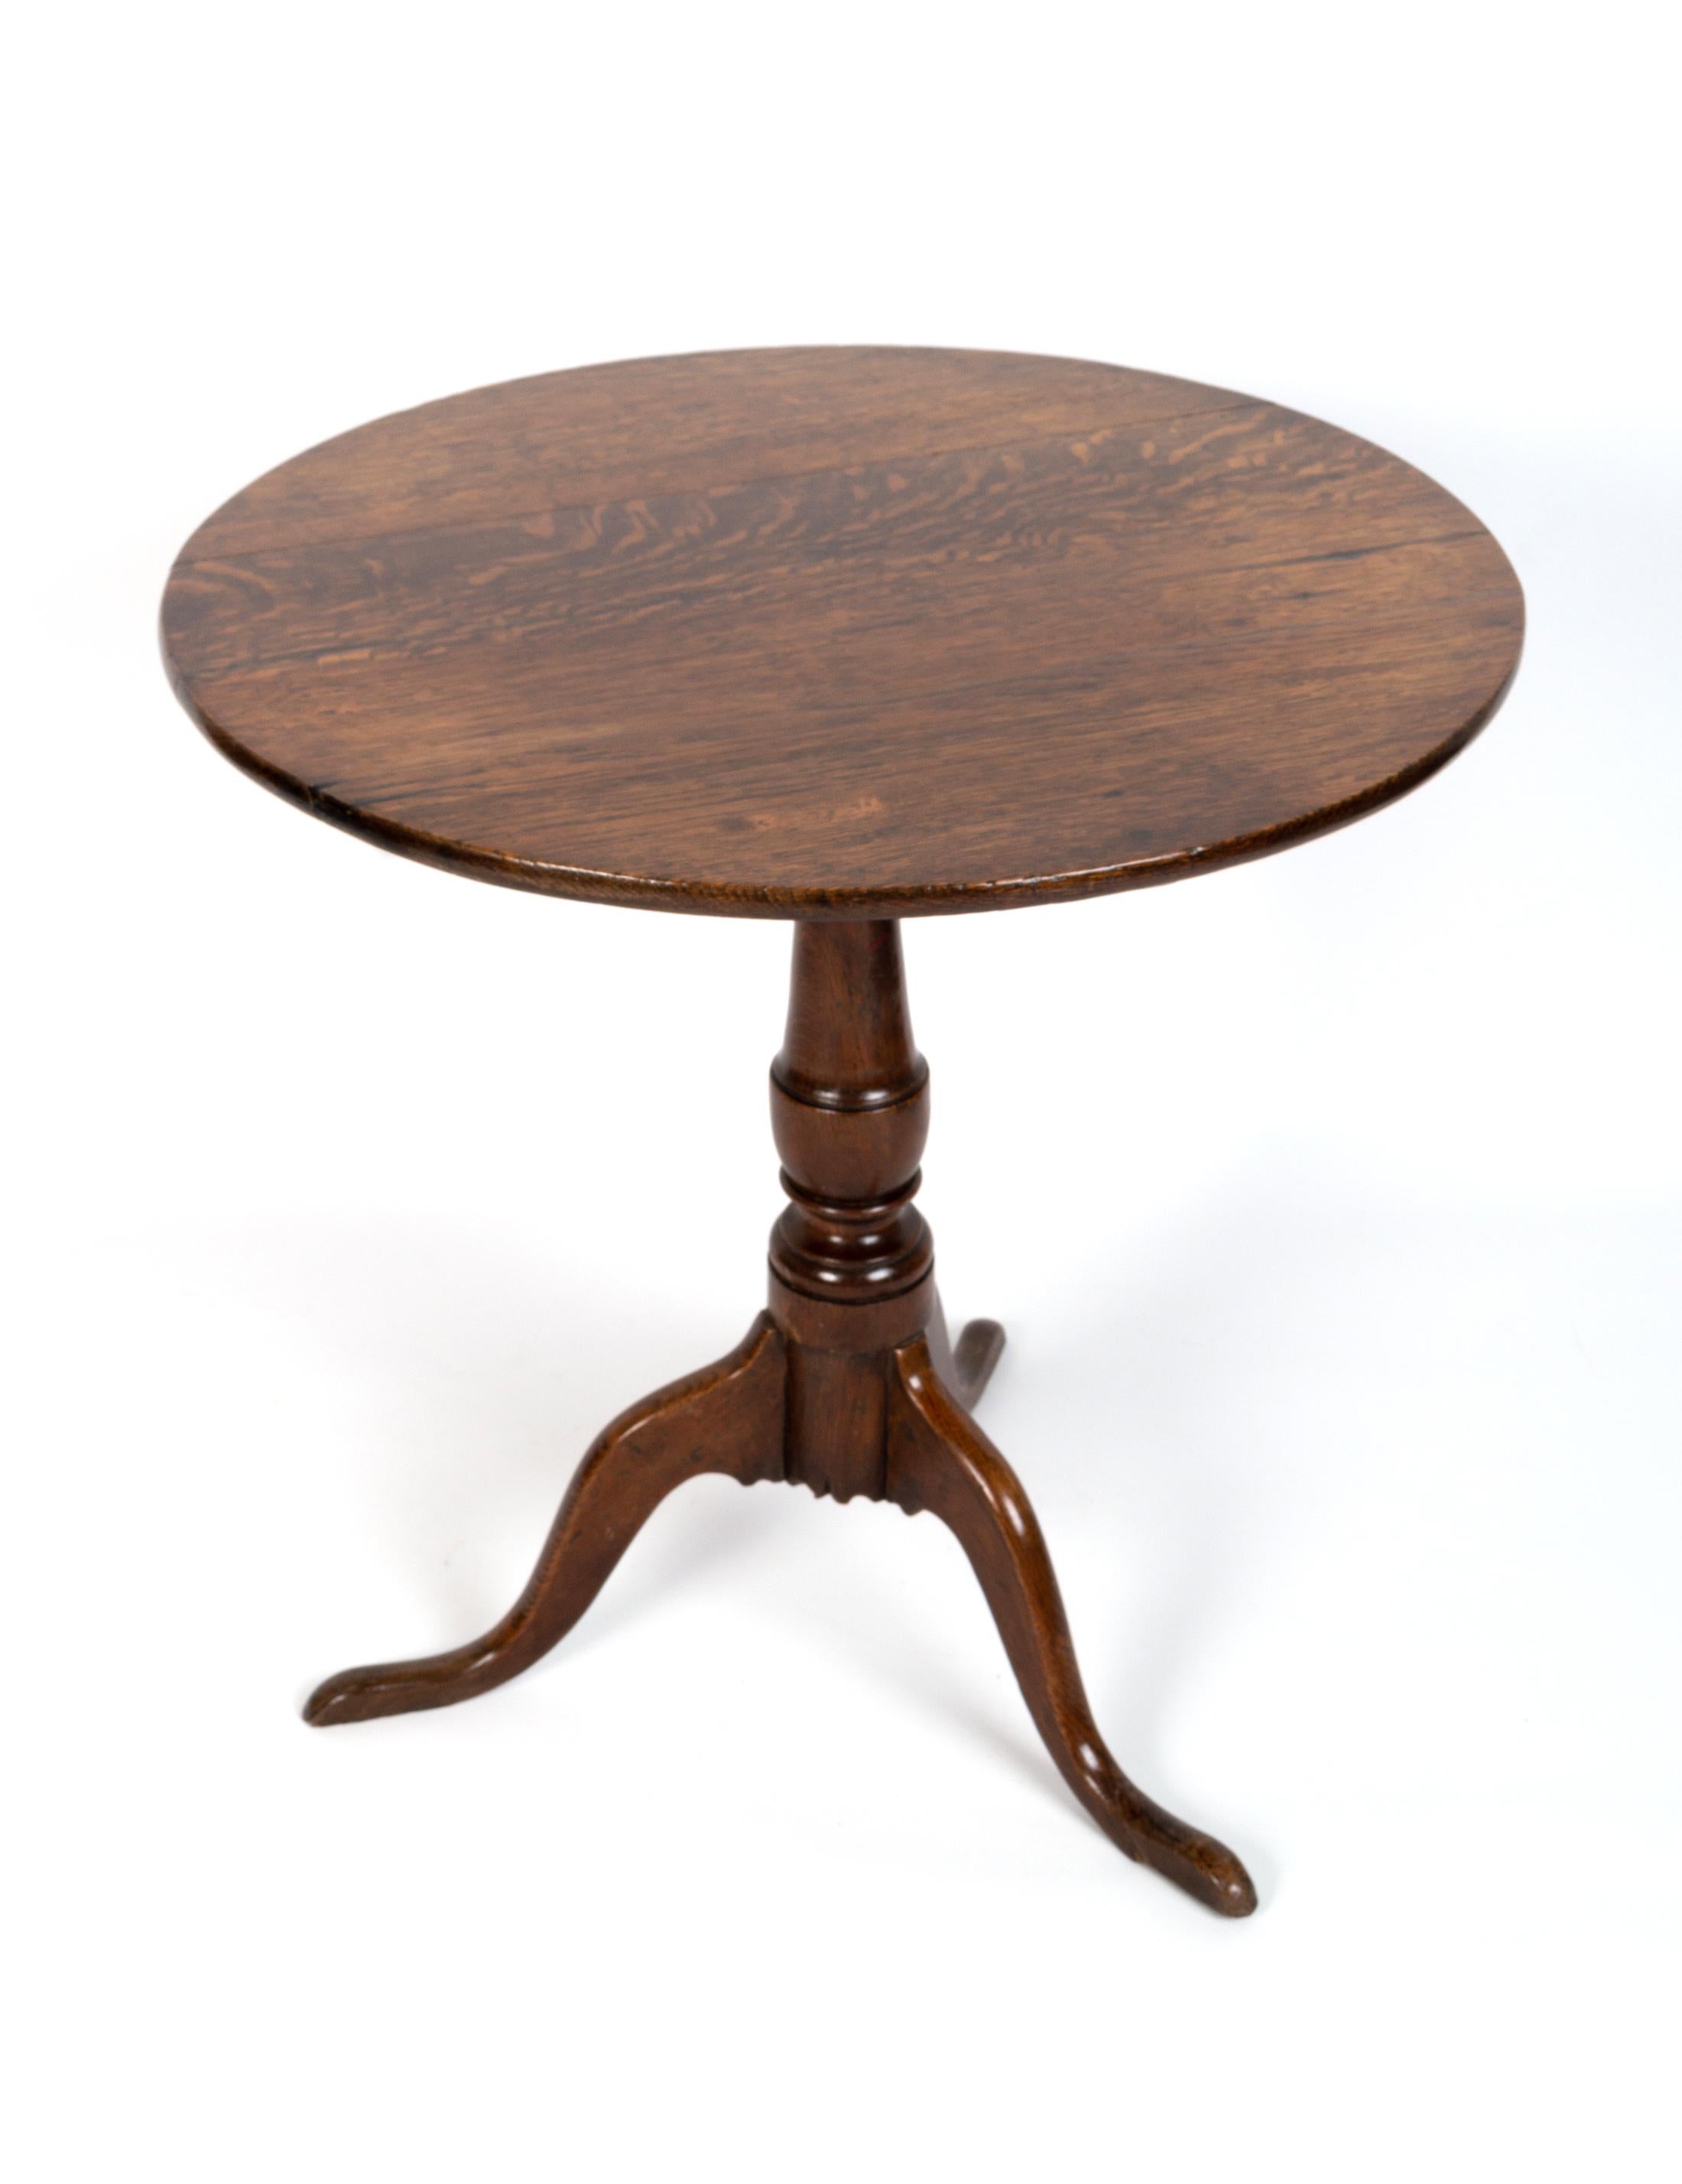 An English 18th century George III oak tripod table 
England, C.1790. 
In excellent condition commensurate of age.